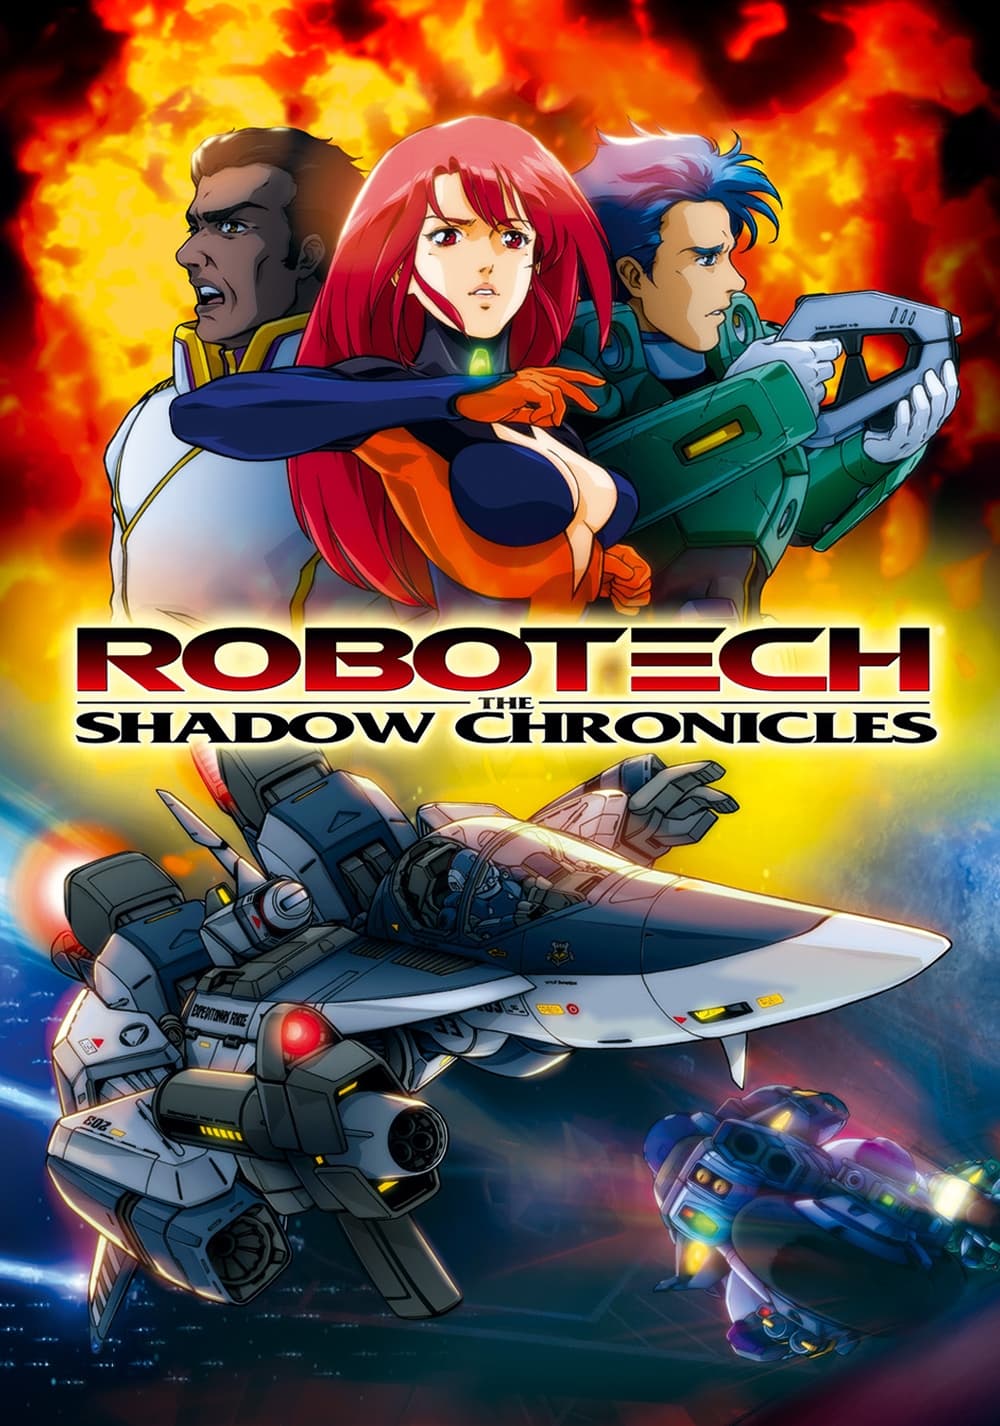 Robotech - The shadow chronicles (2006)